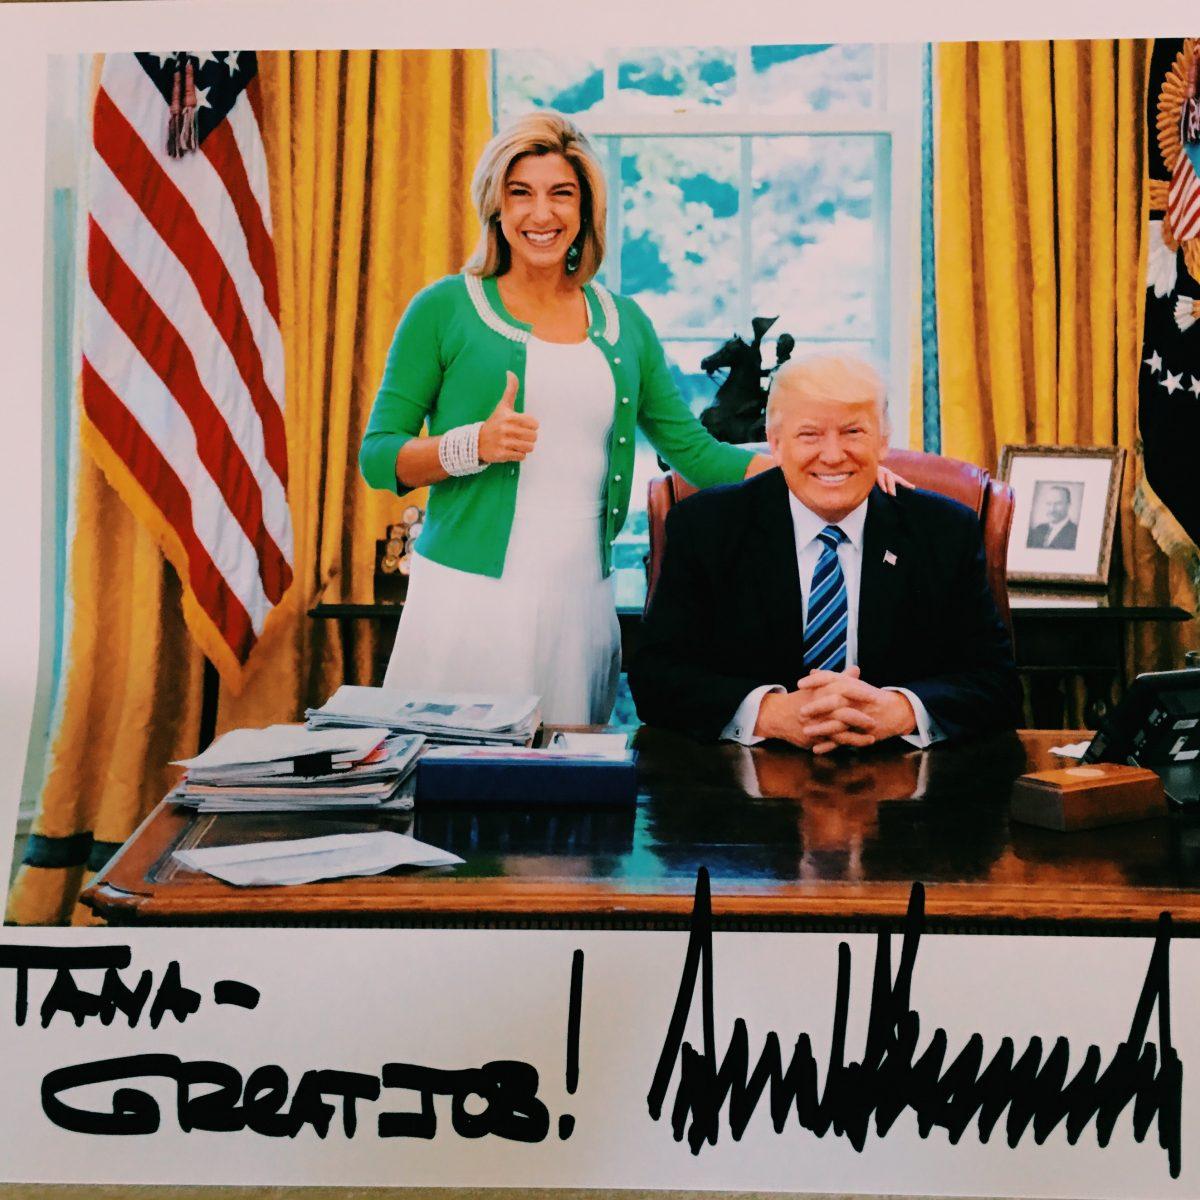 Tana Goertz with President Donald Trump in the Oval Office in the White House in Washington on May 4, 2017. The picture is autographed by President Trump. (Courtesy Tana Goertz)